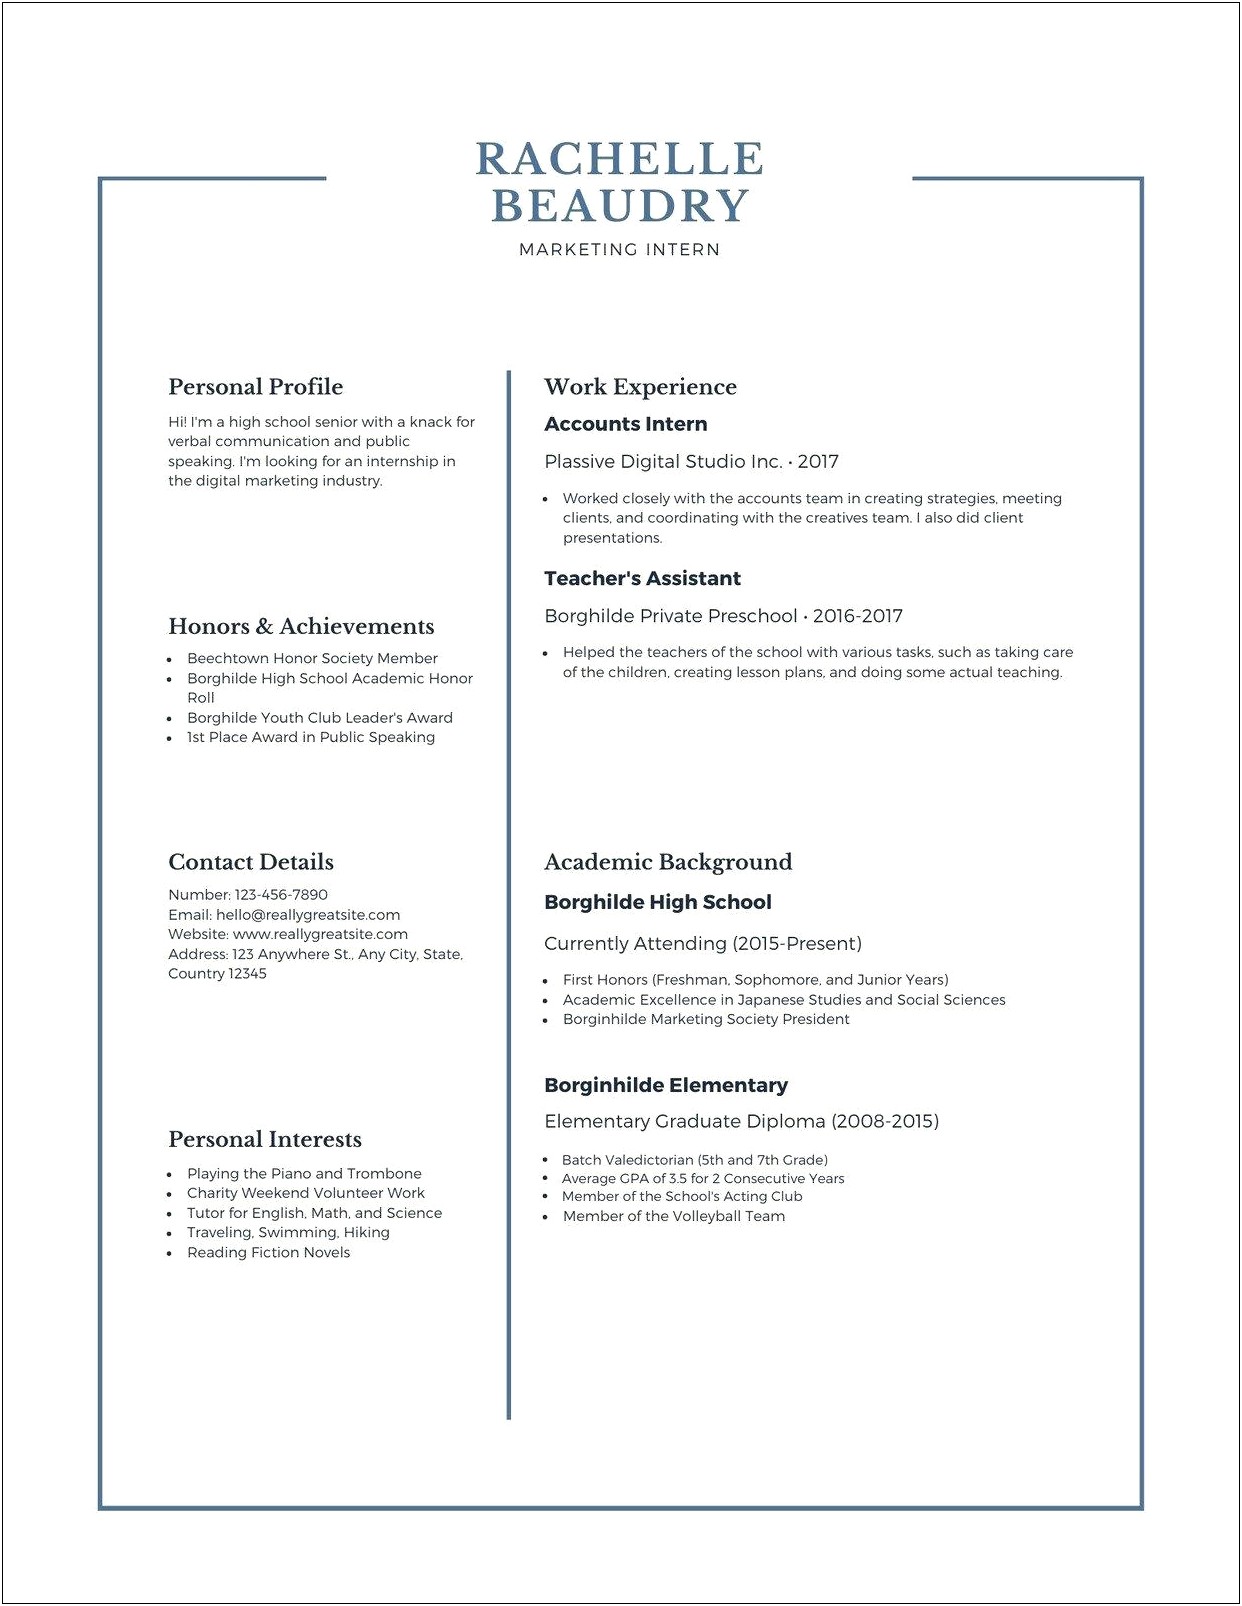 Resume Examples Currently Attending School